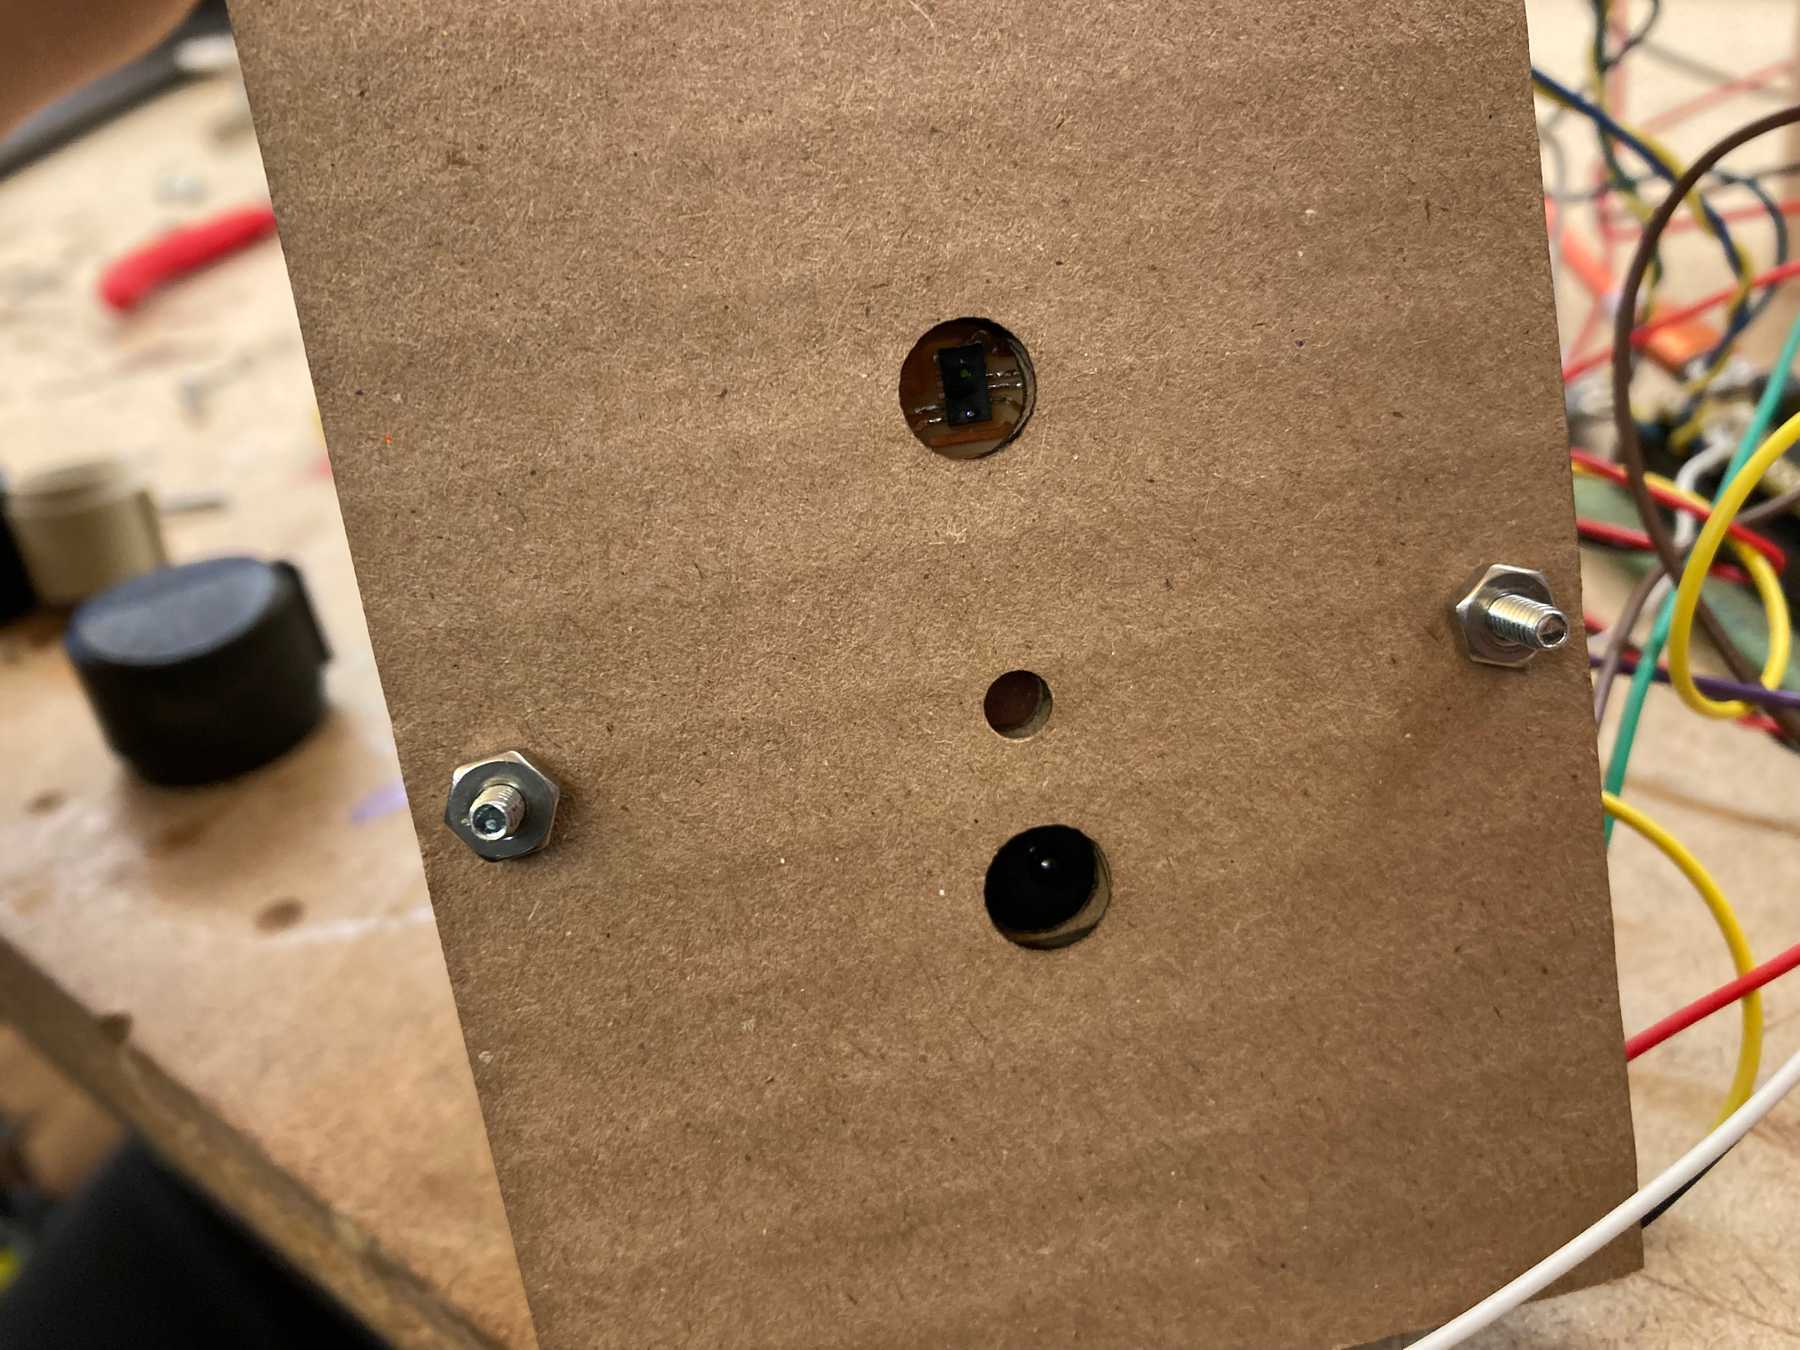 Testing the sensors with laser cut cardboard